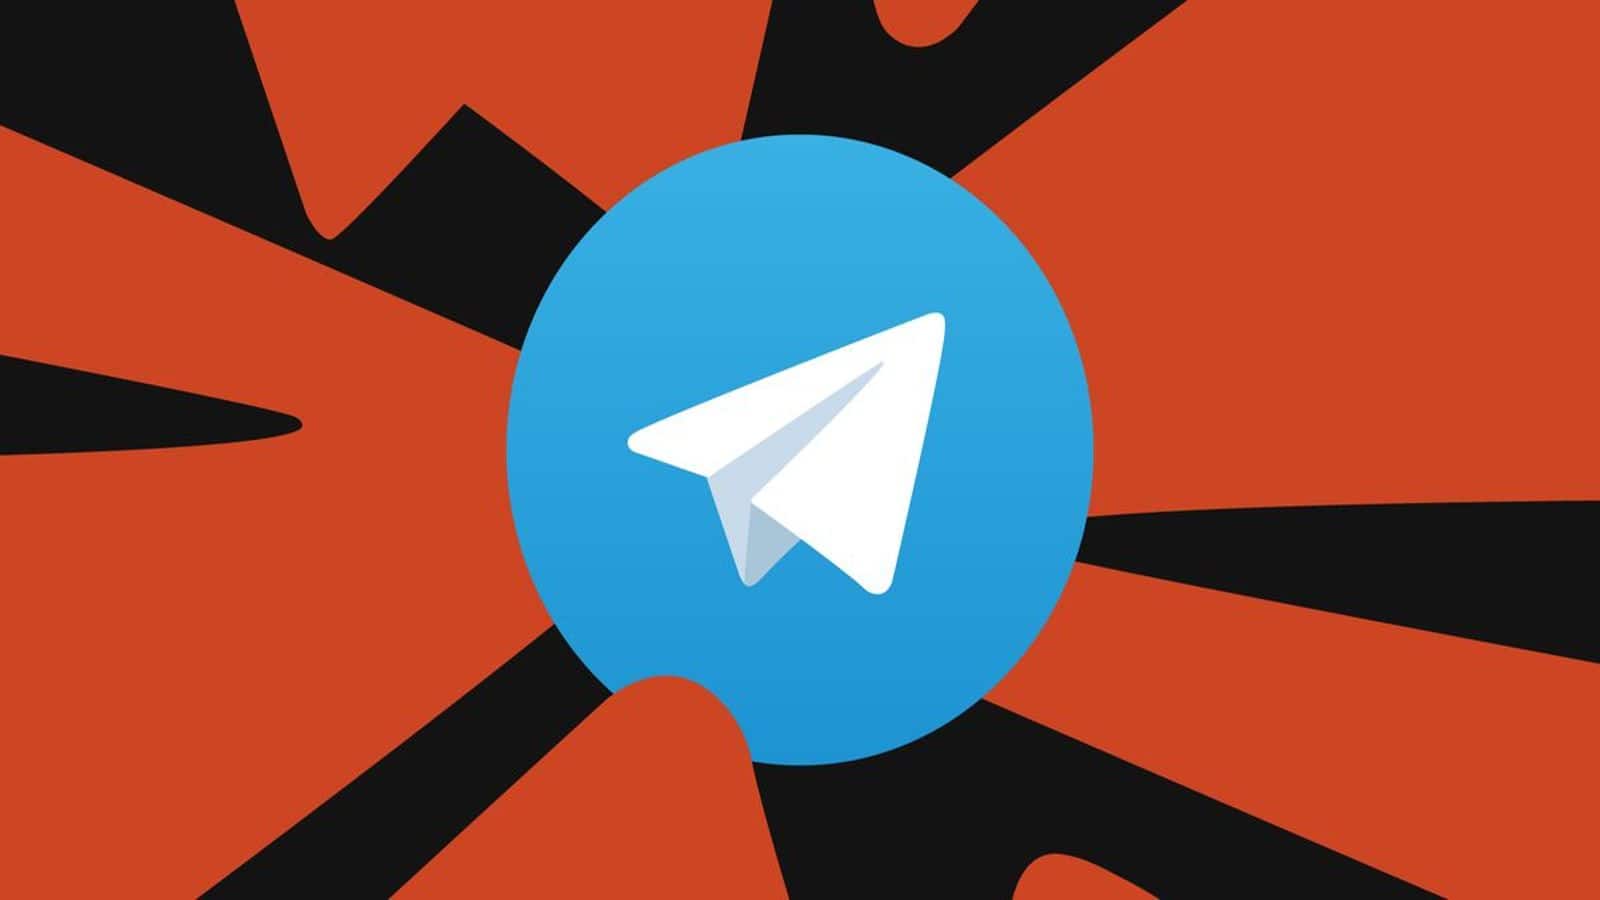 Telegram Premium subscription available for free but comes with risks